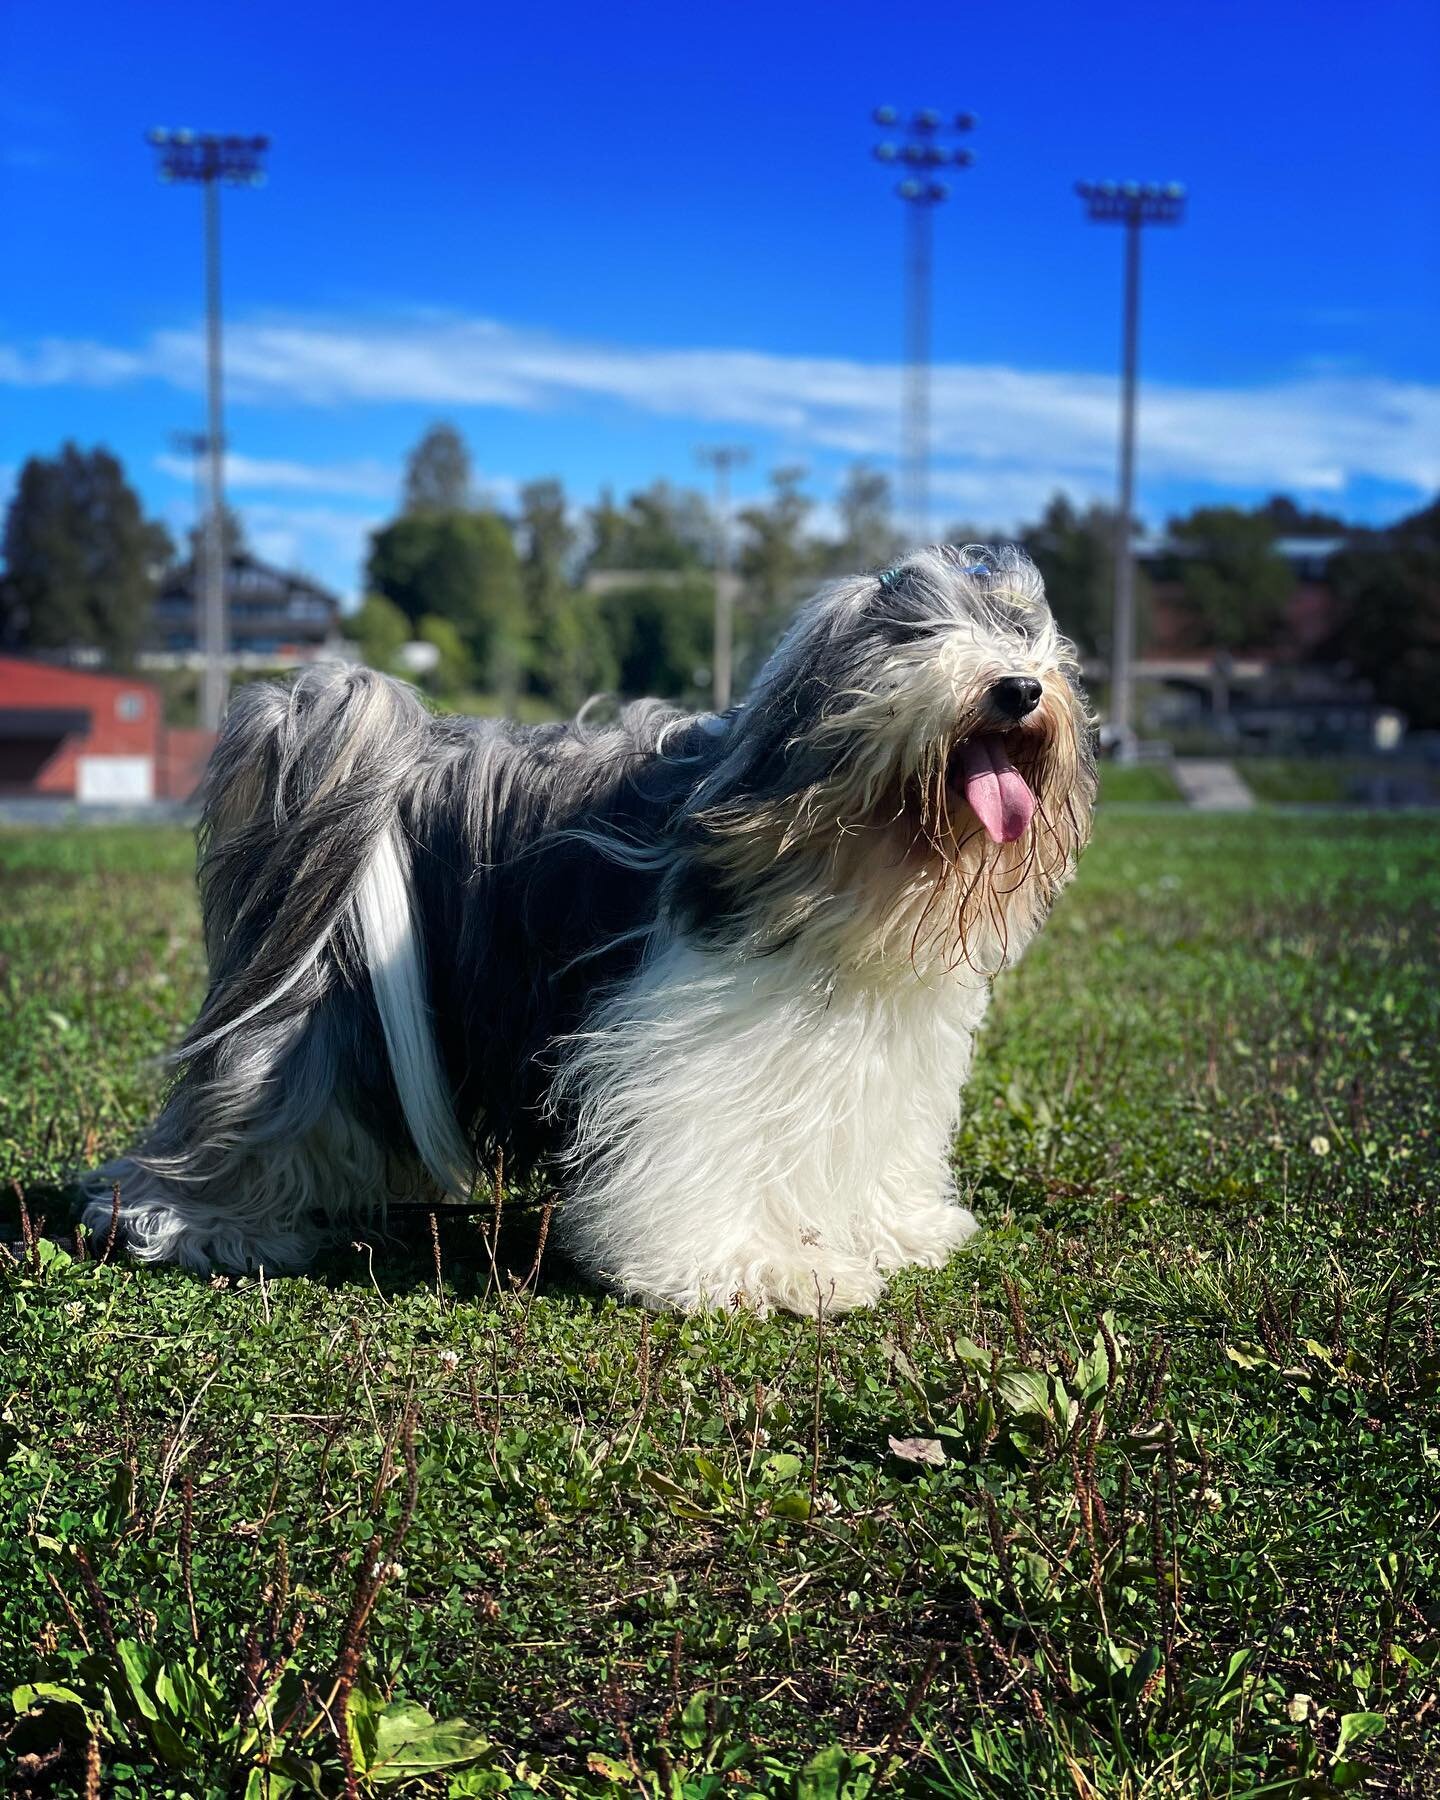 Show dog on sunday, playful beast in the sun the day after ❤️ Brage ❤️

.
.
.
.
.
.
.
.

#dogphotographer #dogphoto
#tibetanterrier #tibetanterriersofinstagram #tibetanterrierlove #tibetanterriersofinsta
#tibetanskterrier #tibetanskterriernorge #tibe